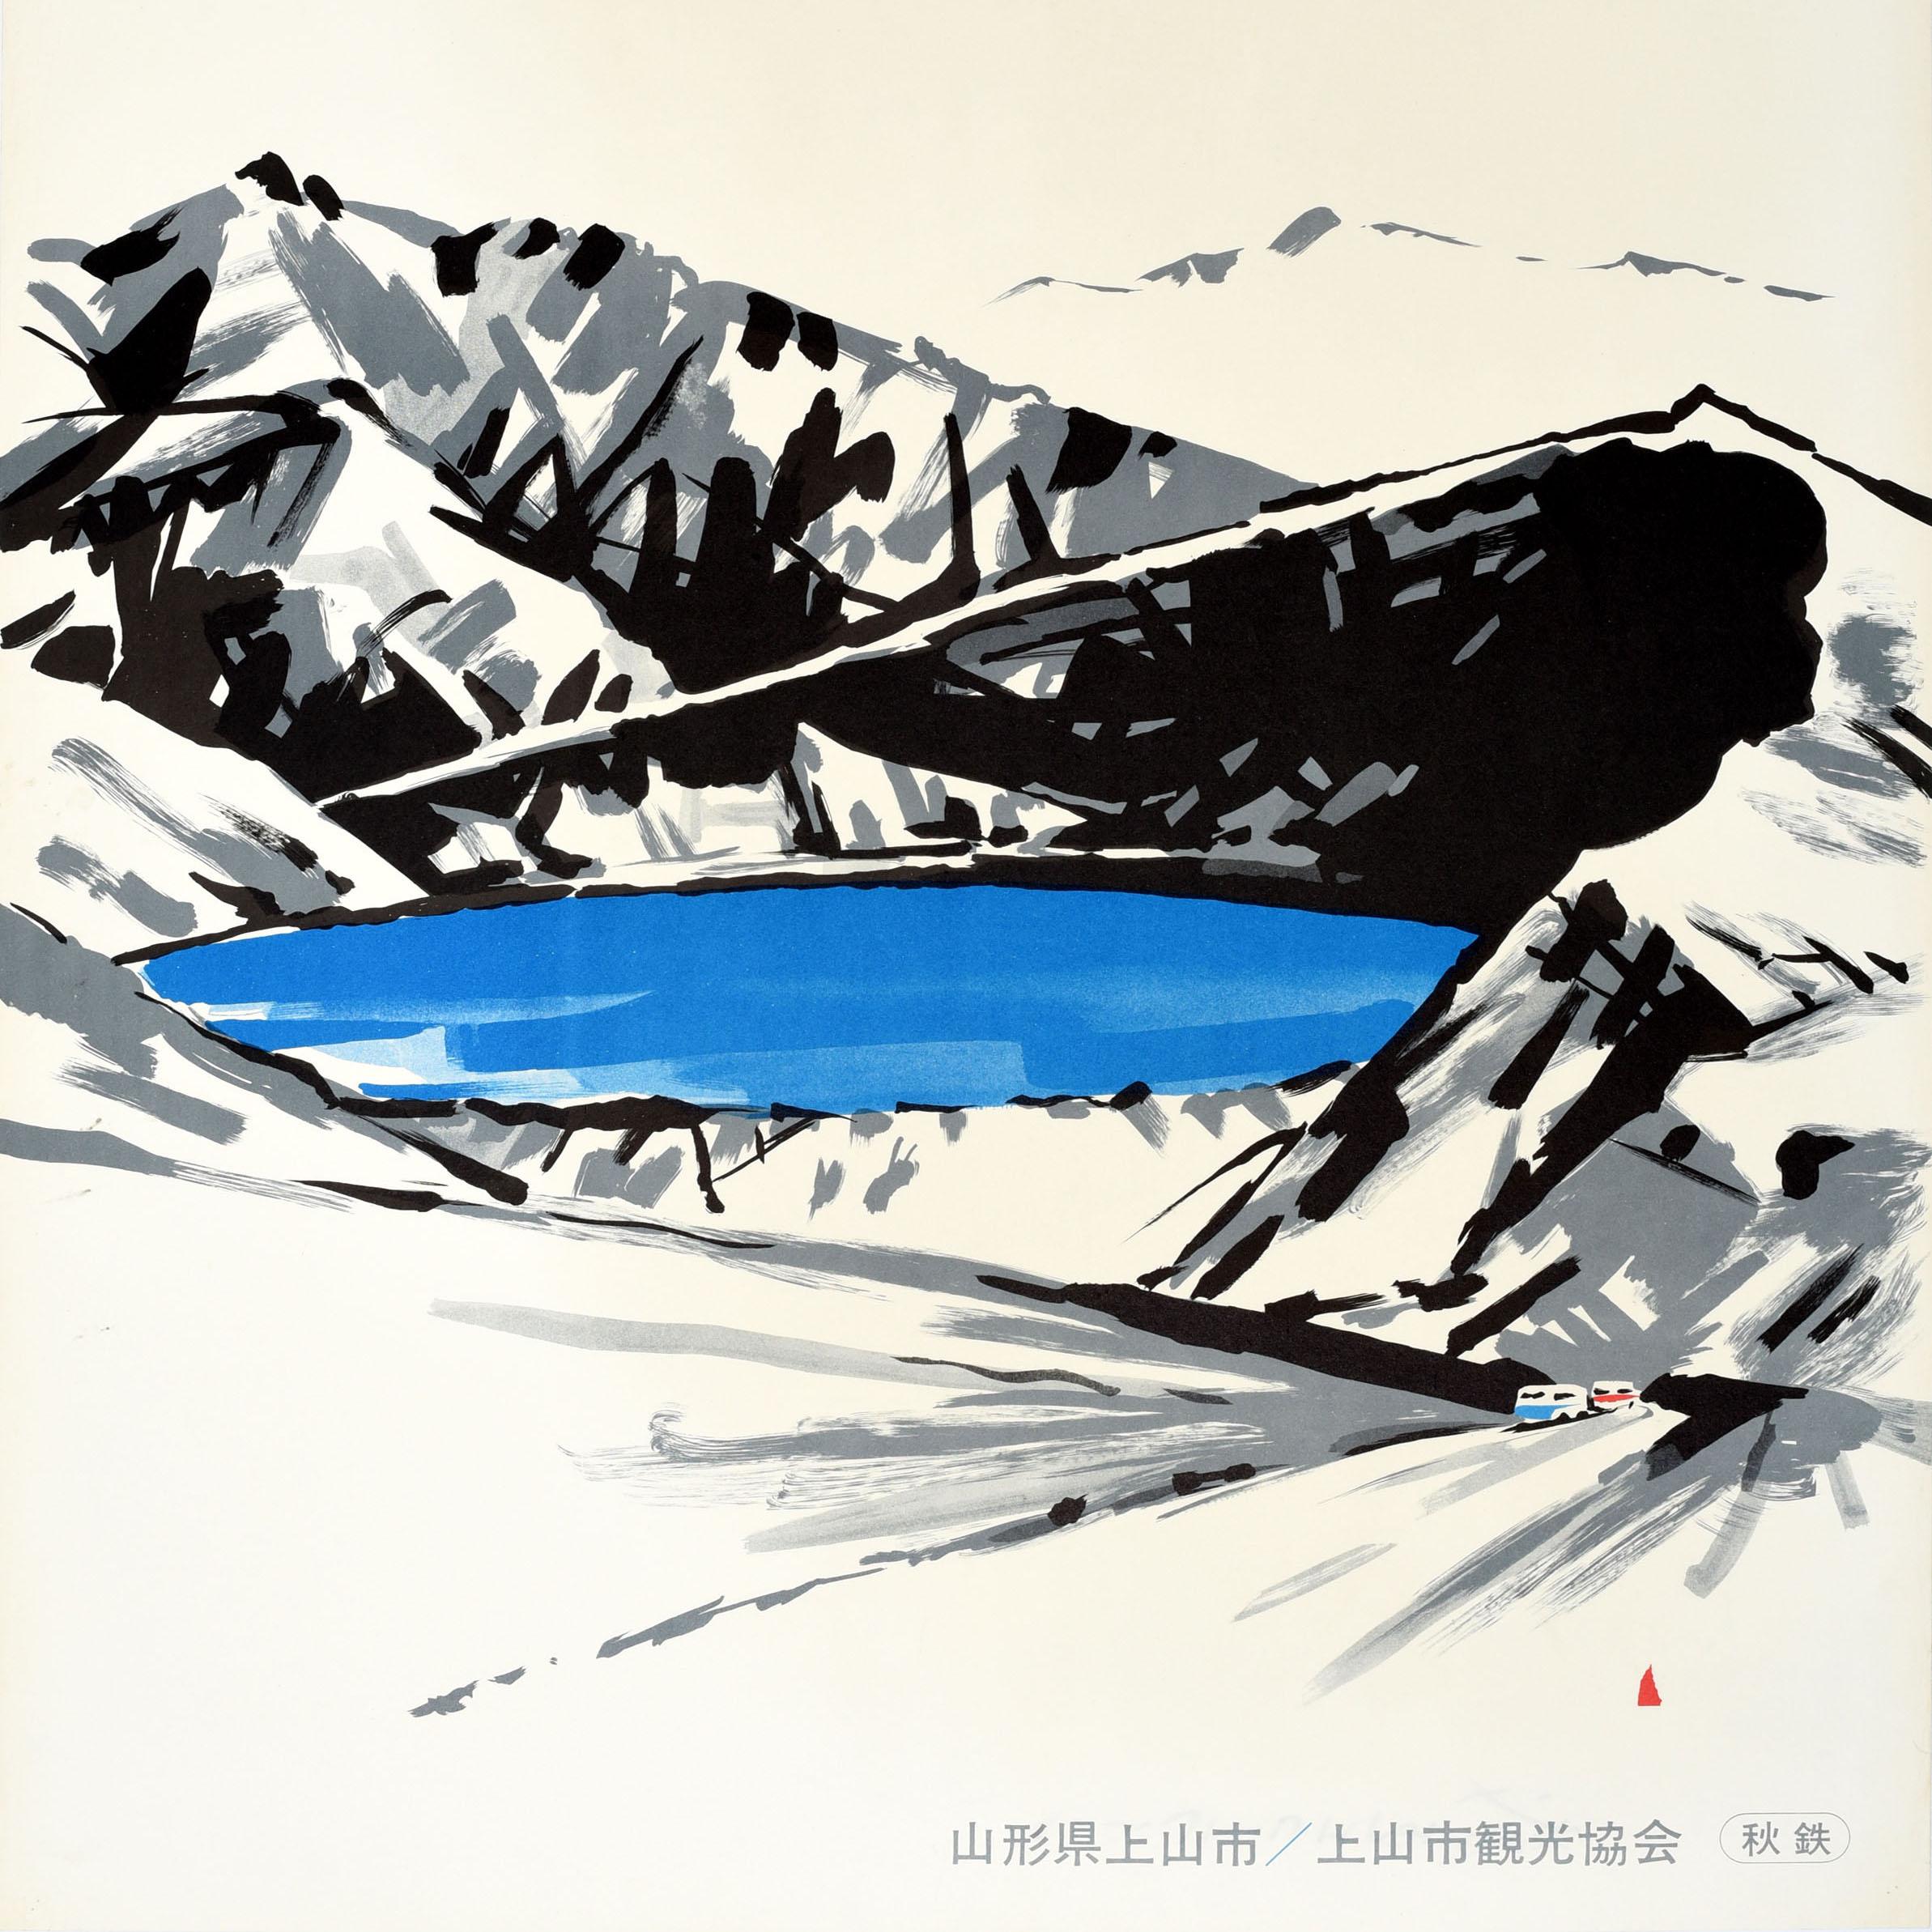 Original vintage travel poster for the Kaminoyama Onsen hot springs health resort town featuring great artwork in grey and black depicting a scenic view of the mountains with two tourist buses driving on the Zao Echo Line road by the Mount Zao